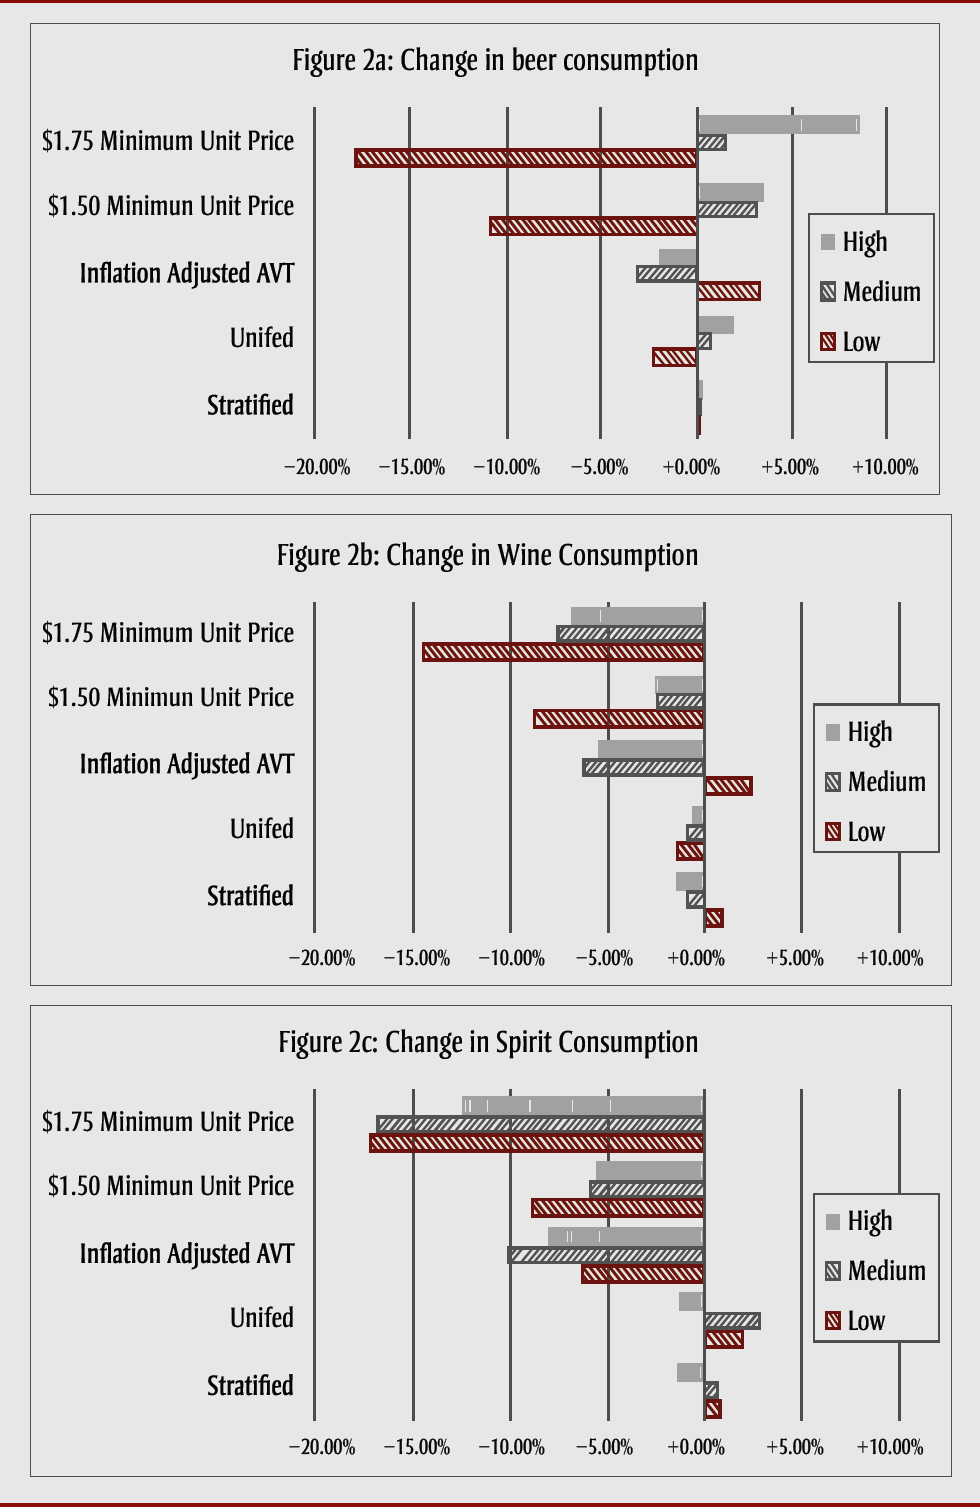 Figure 2. Change in consumption by scenario, beverage category (beer, wine, spirits) and quality group (low, medium, high)